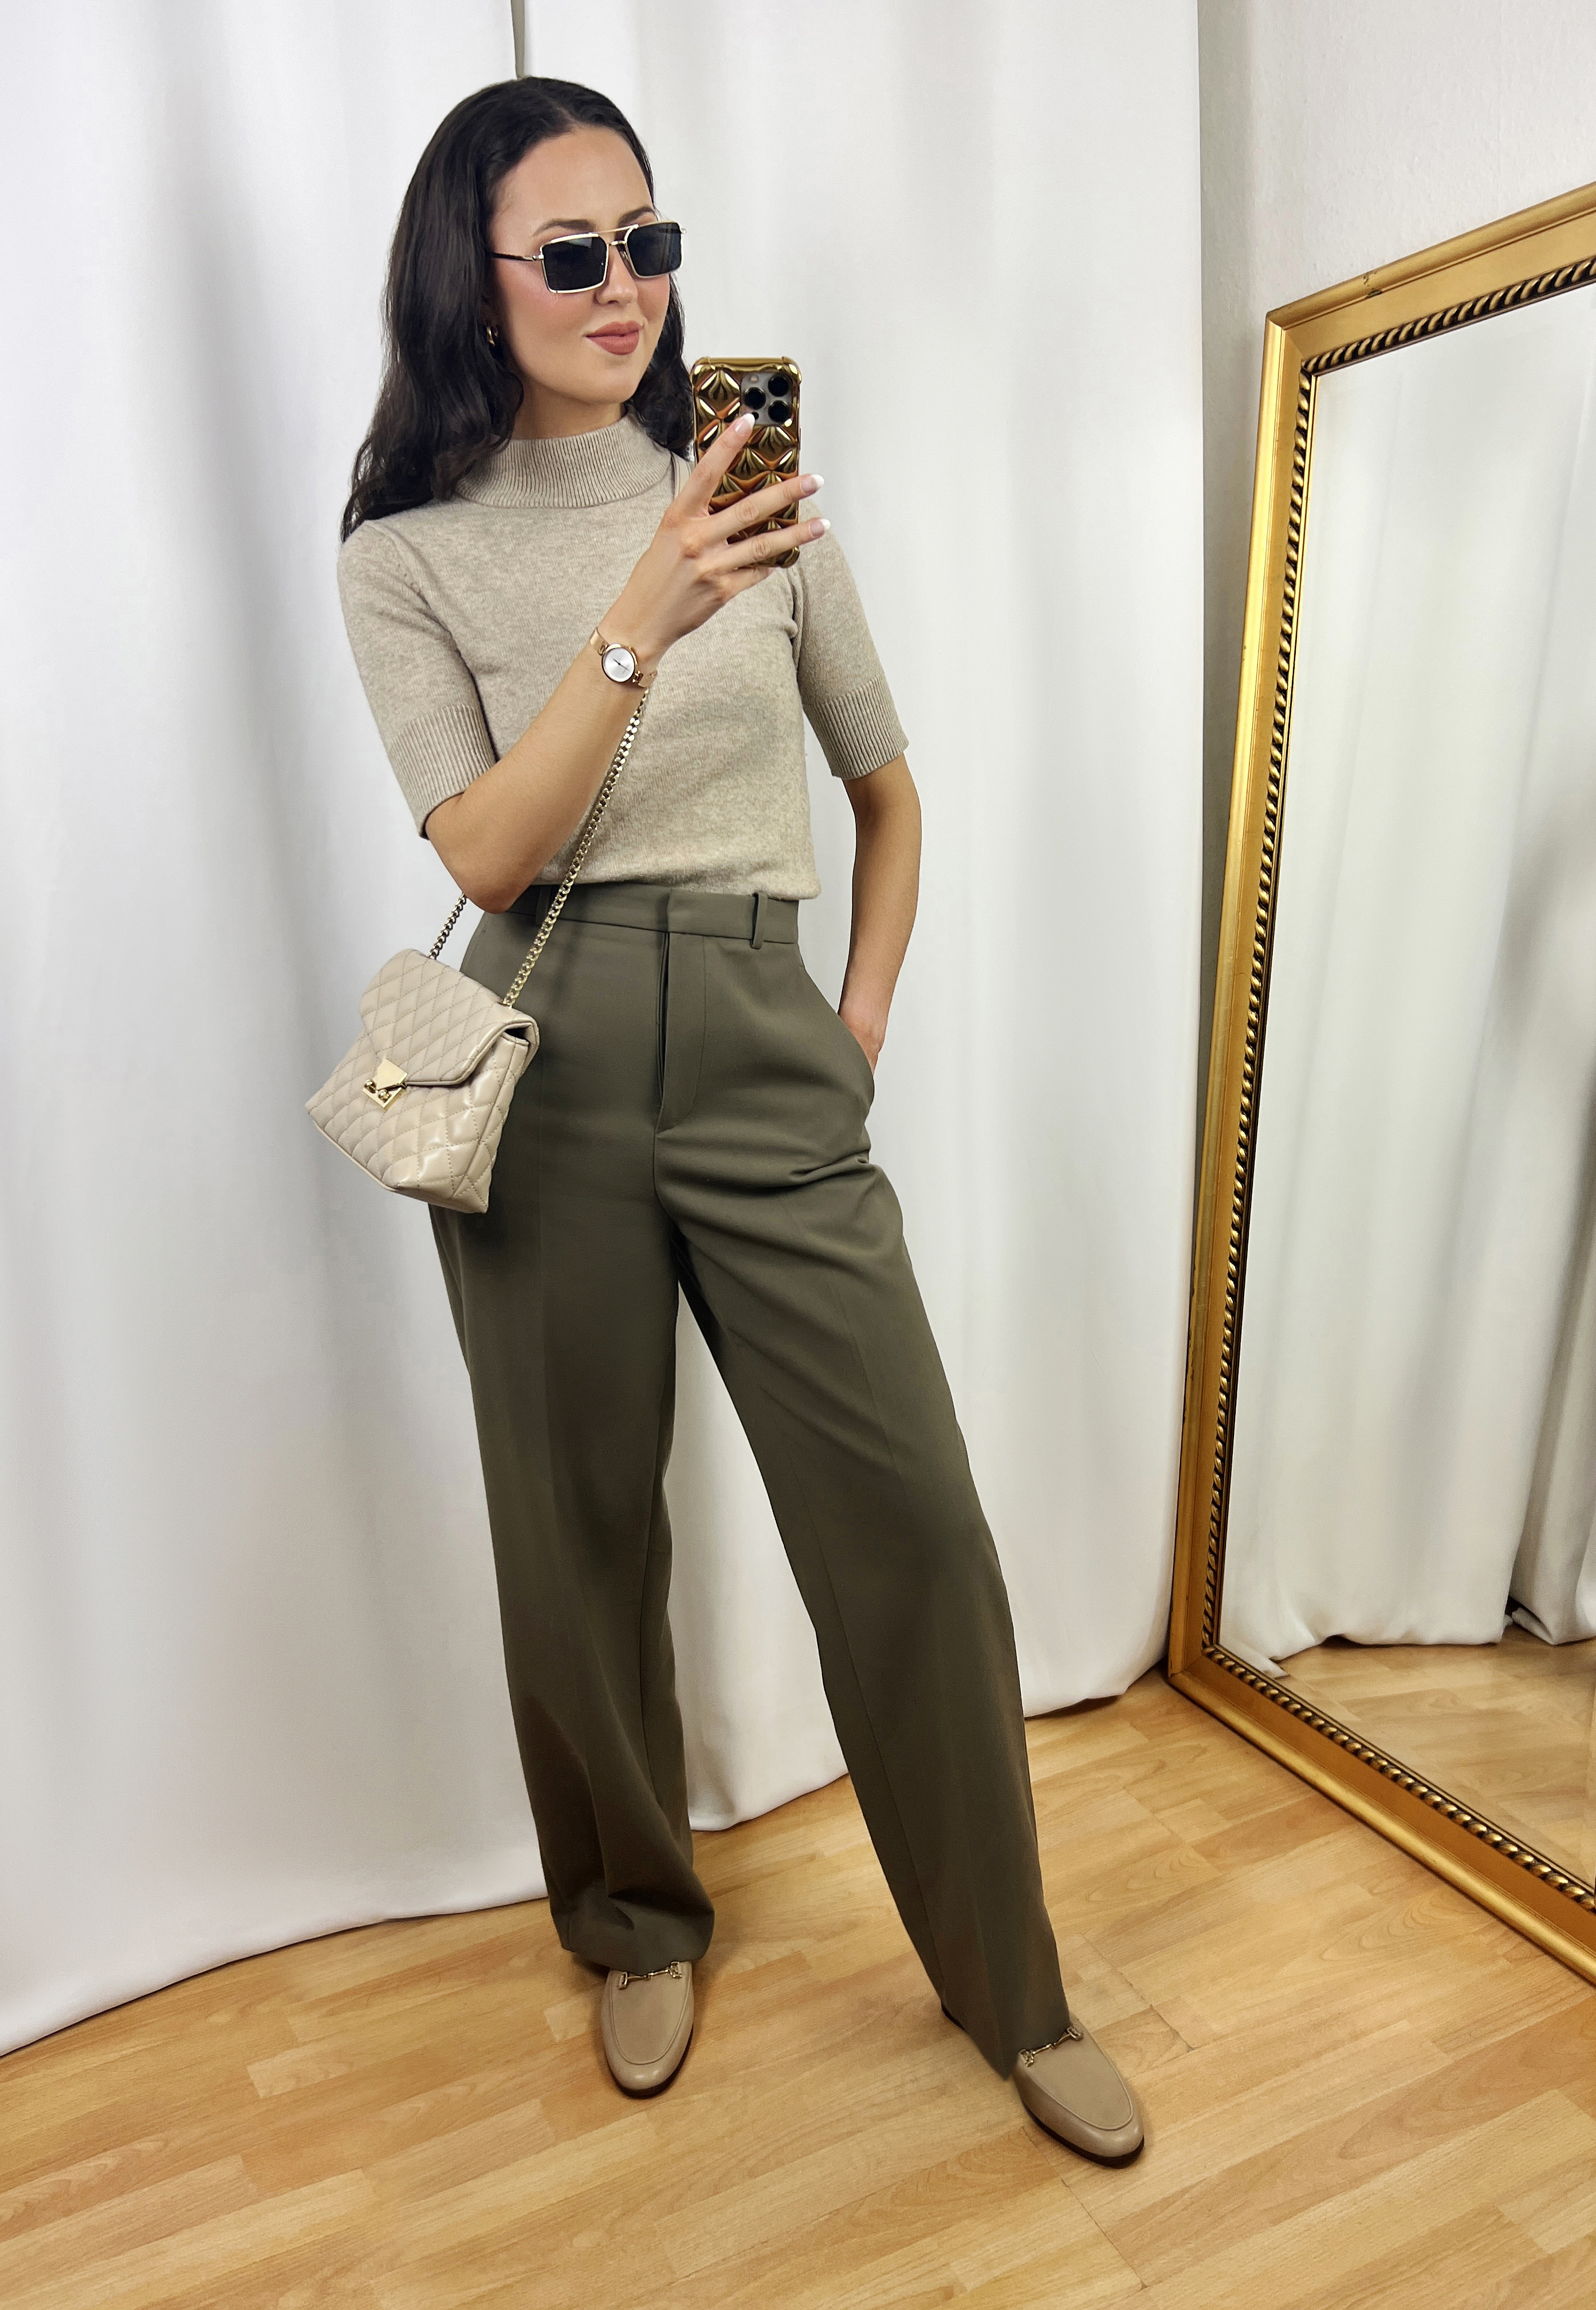 Olive Green Pants Outfit